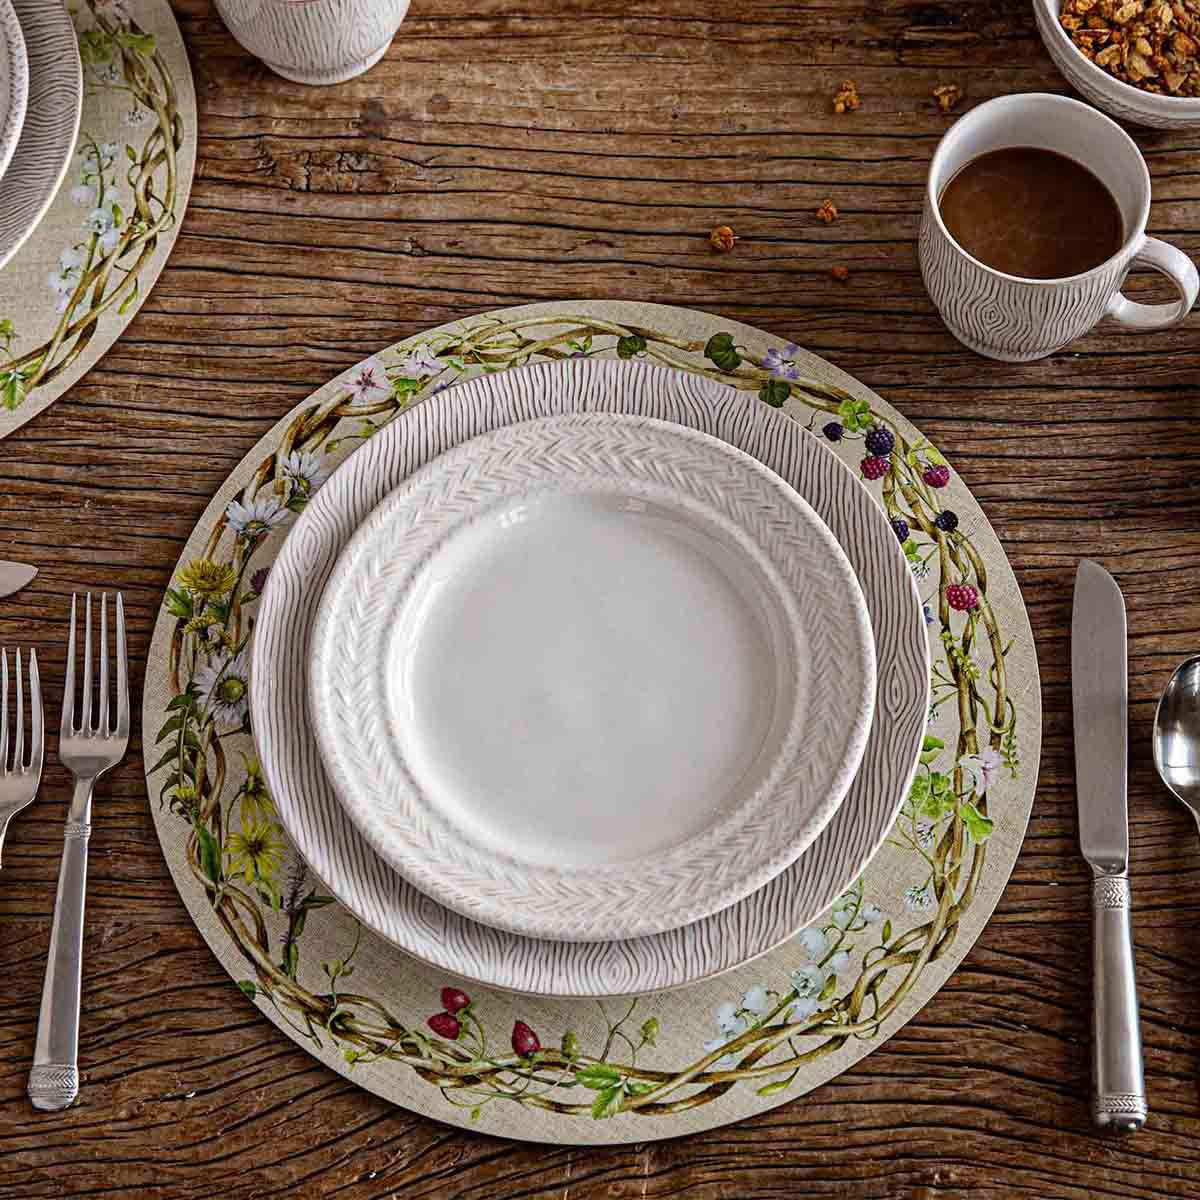 Meadow Walk Placemat - Set of 4